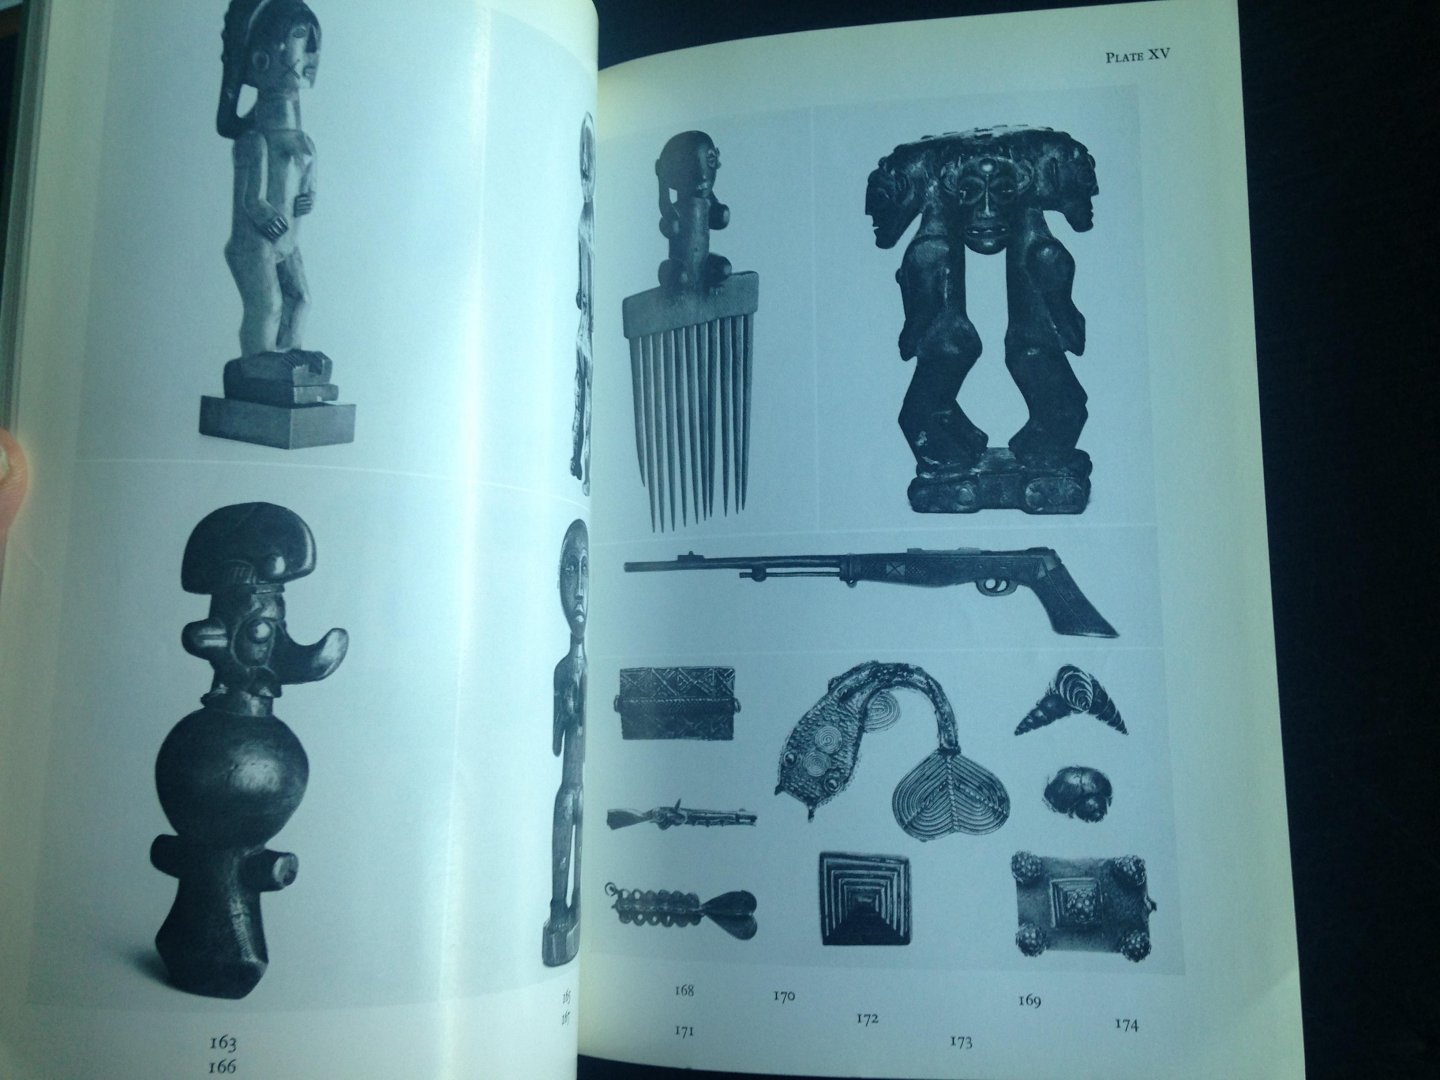 Catalogue Sotheby - Pre-Columbian, American Indian, Oceanic and African Art